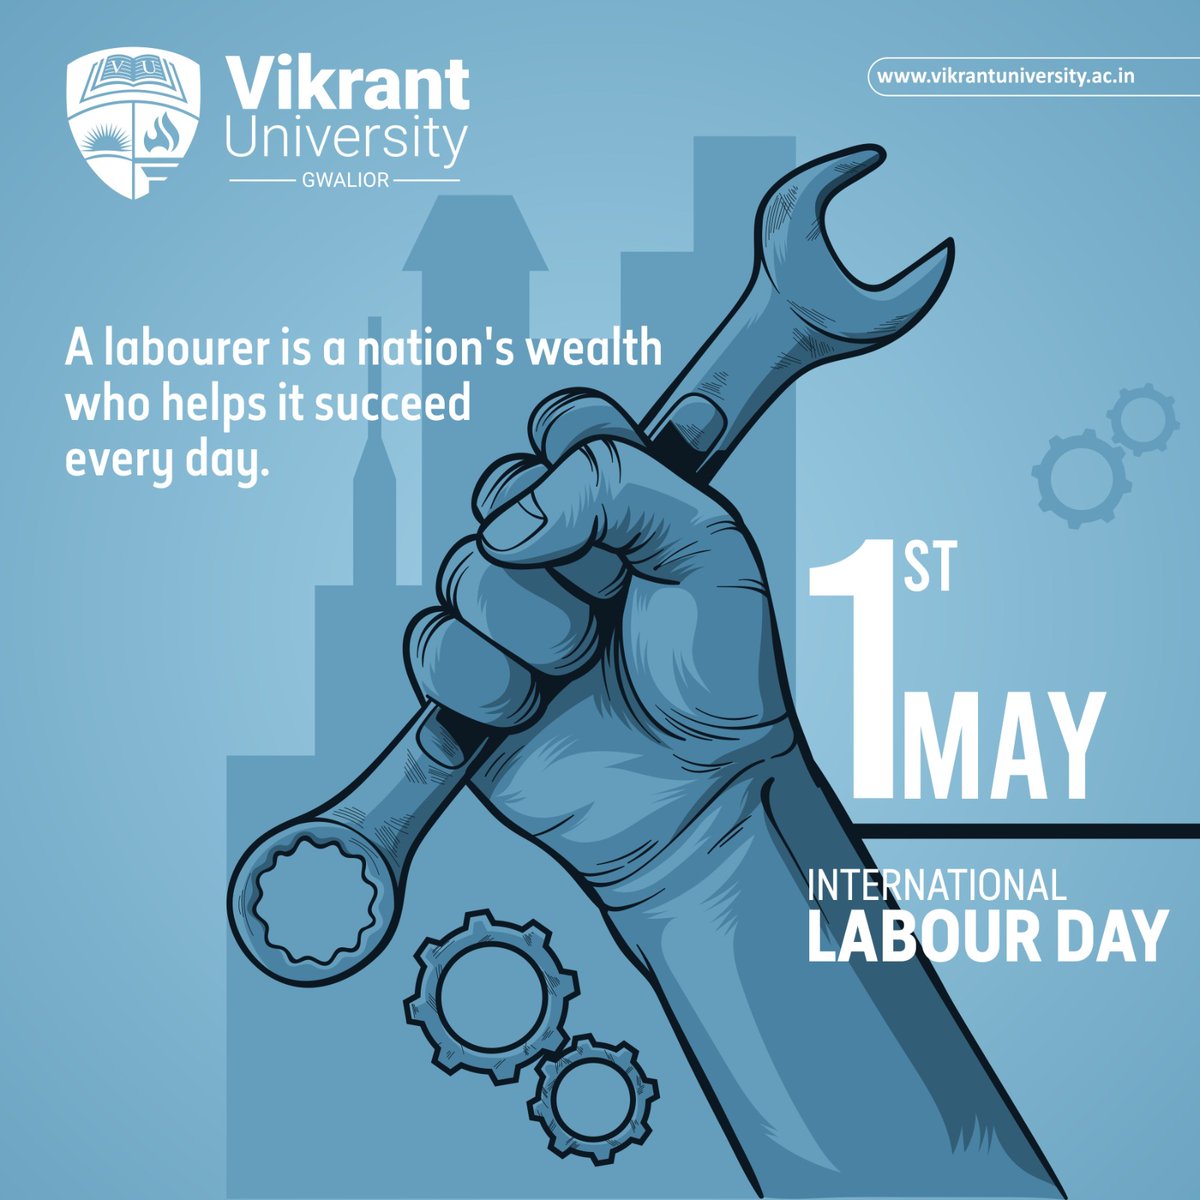 May this day be a celebration of the hard work and dedication of all workers. Wishing everyone success, prosperity, and fulfillment in their endeavors.

#LabourDay #InternationalLabourDay #VikrantUniversity #VikrantGroupofInstitutions #Gwalior #Indore #MadhyaPradesh #India